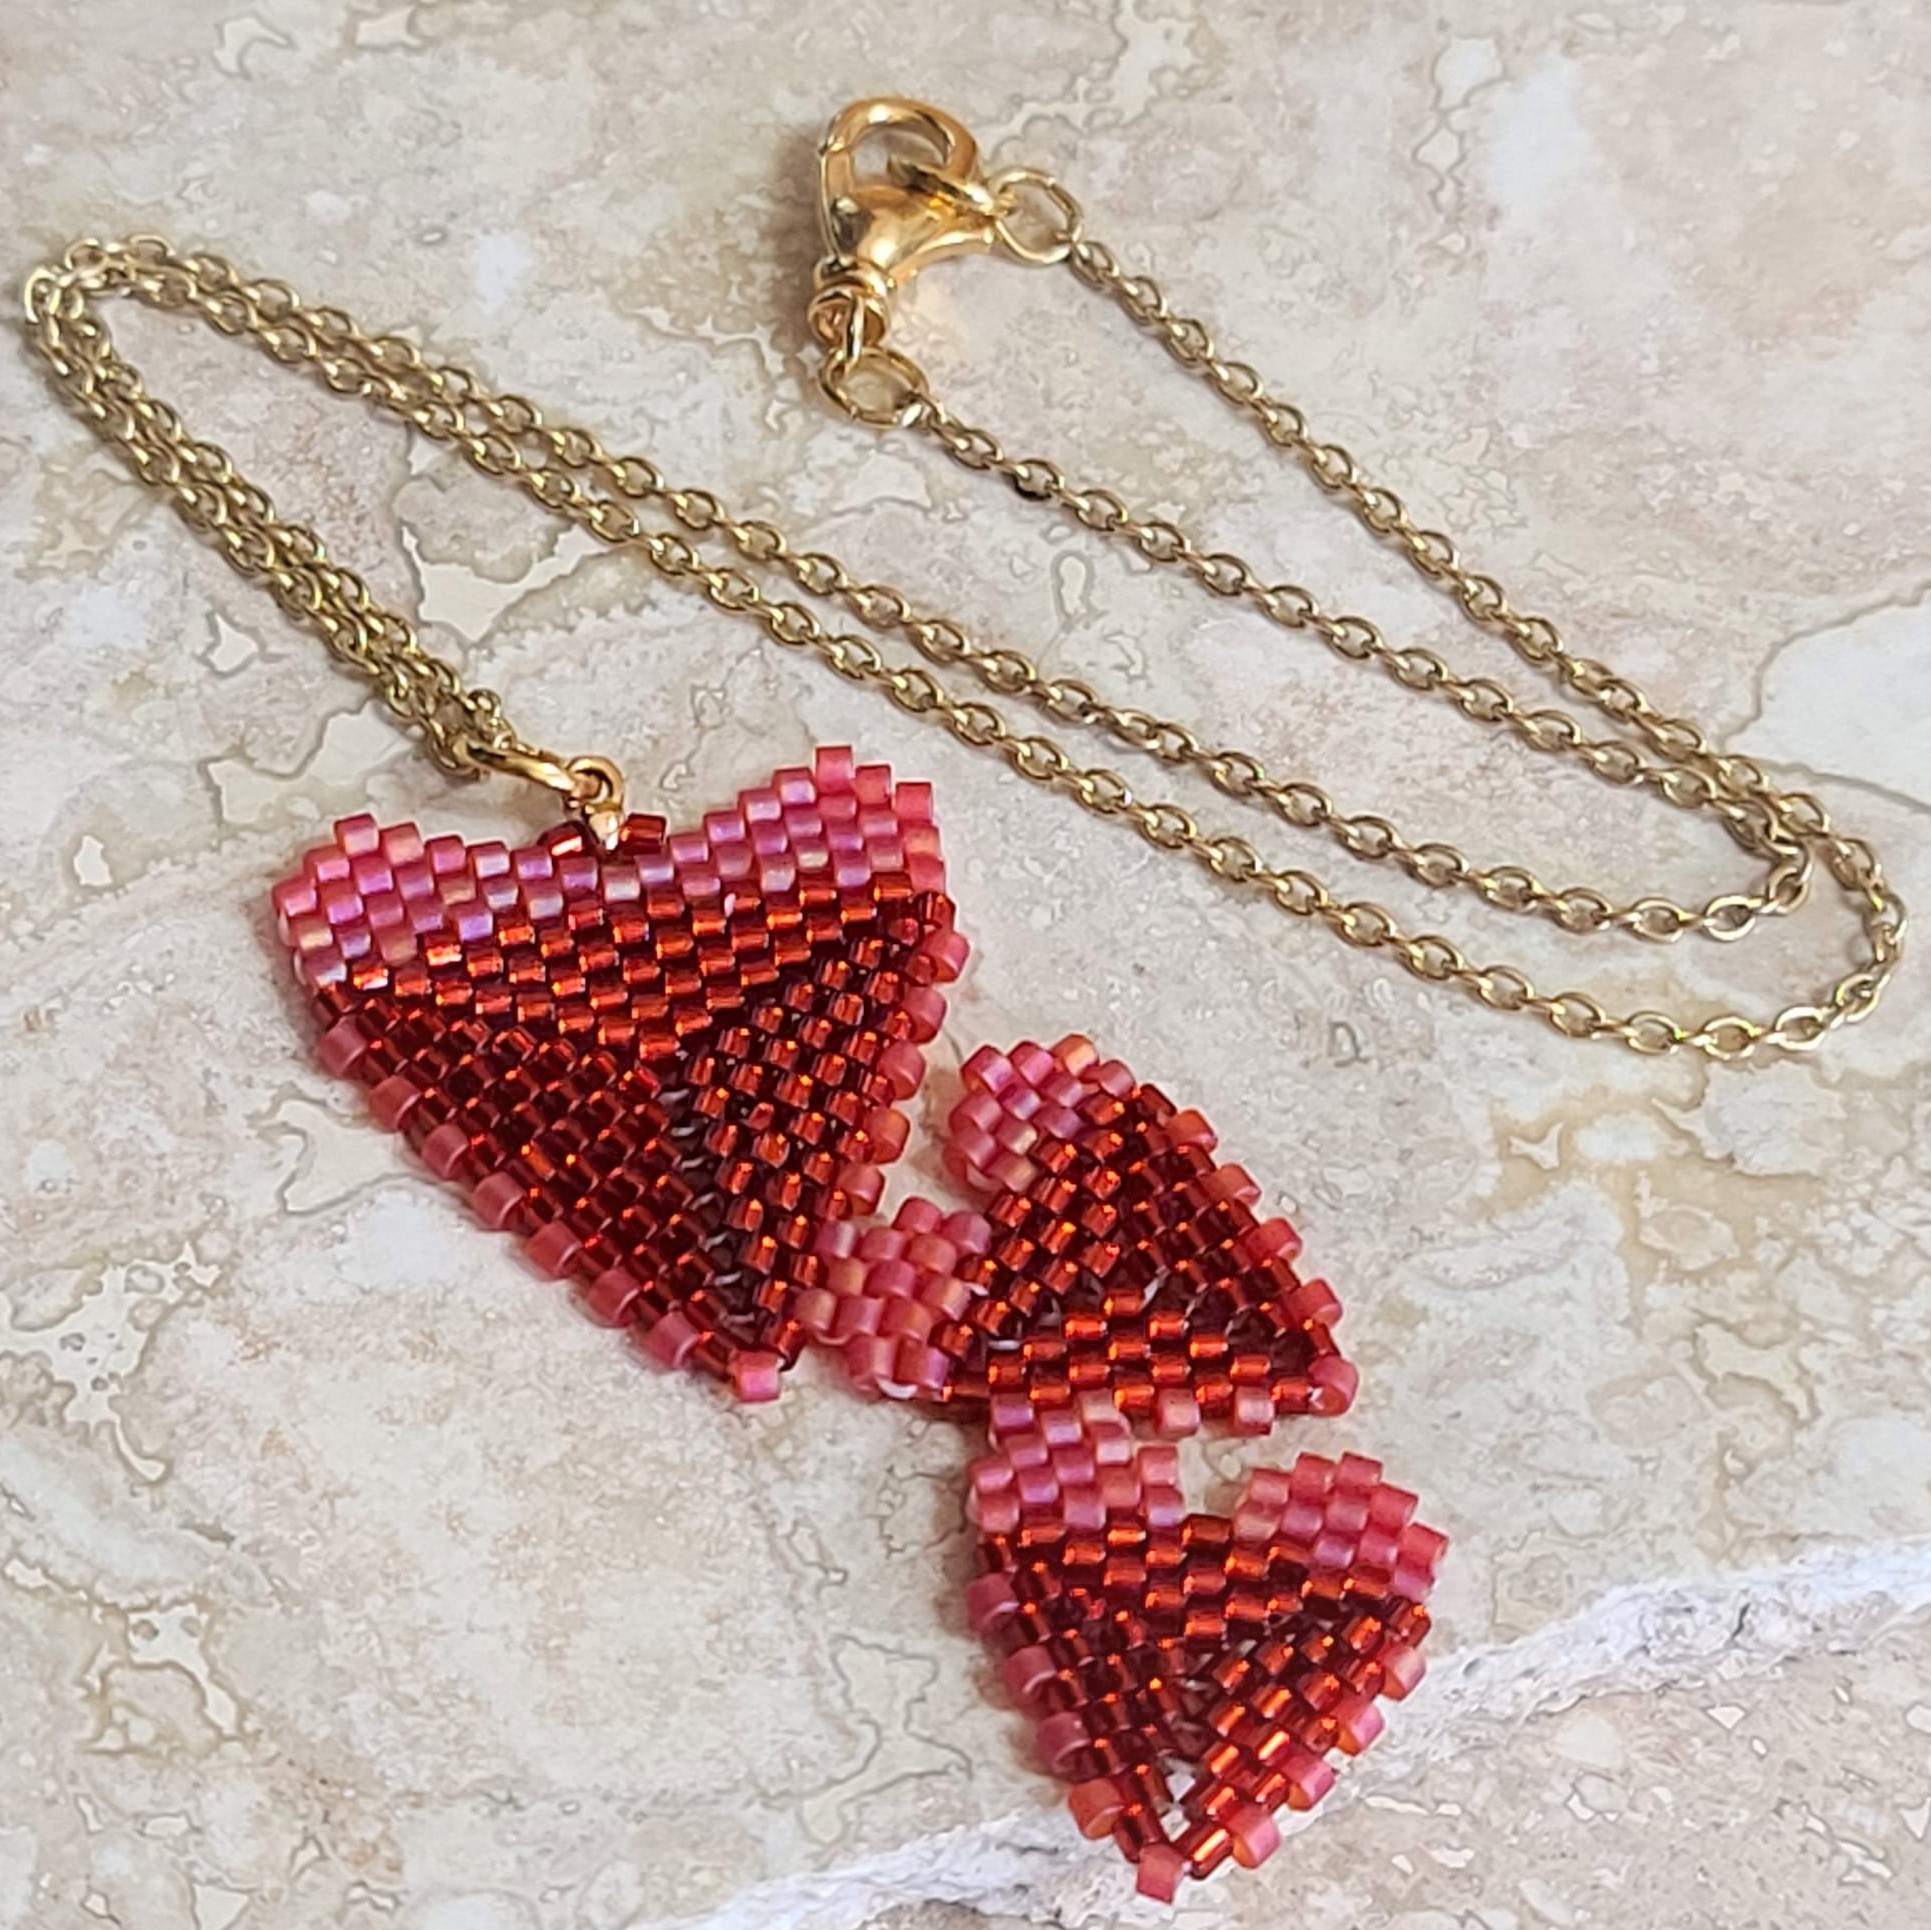 3 Red heart peyote stitch glass bead pendant necklace